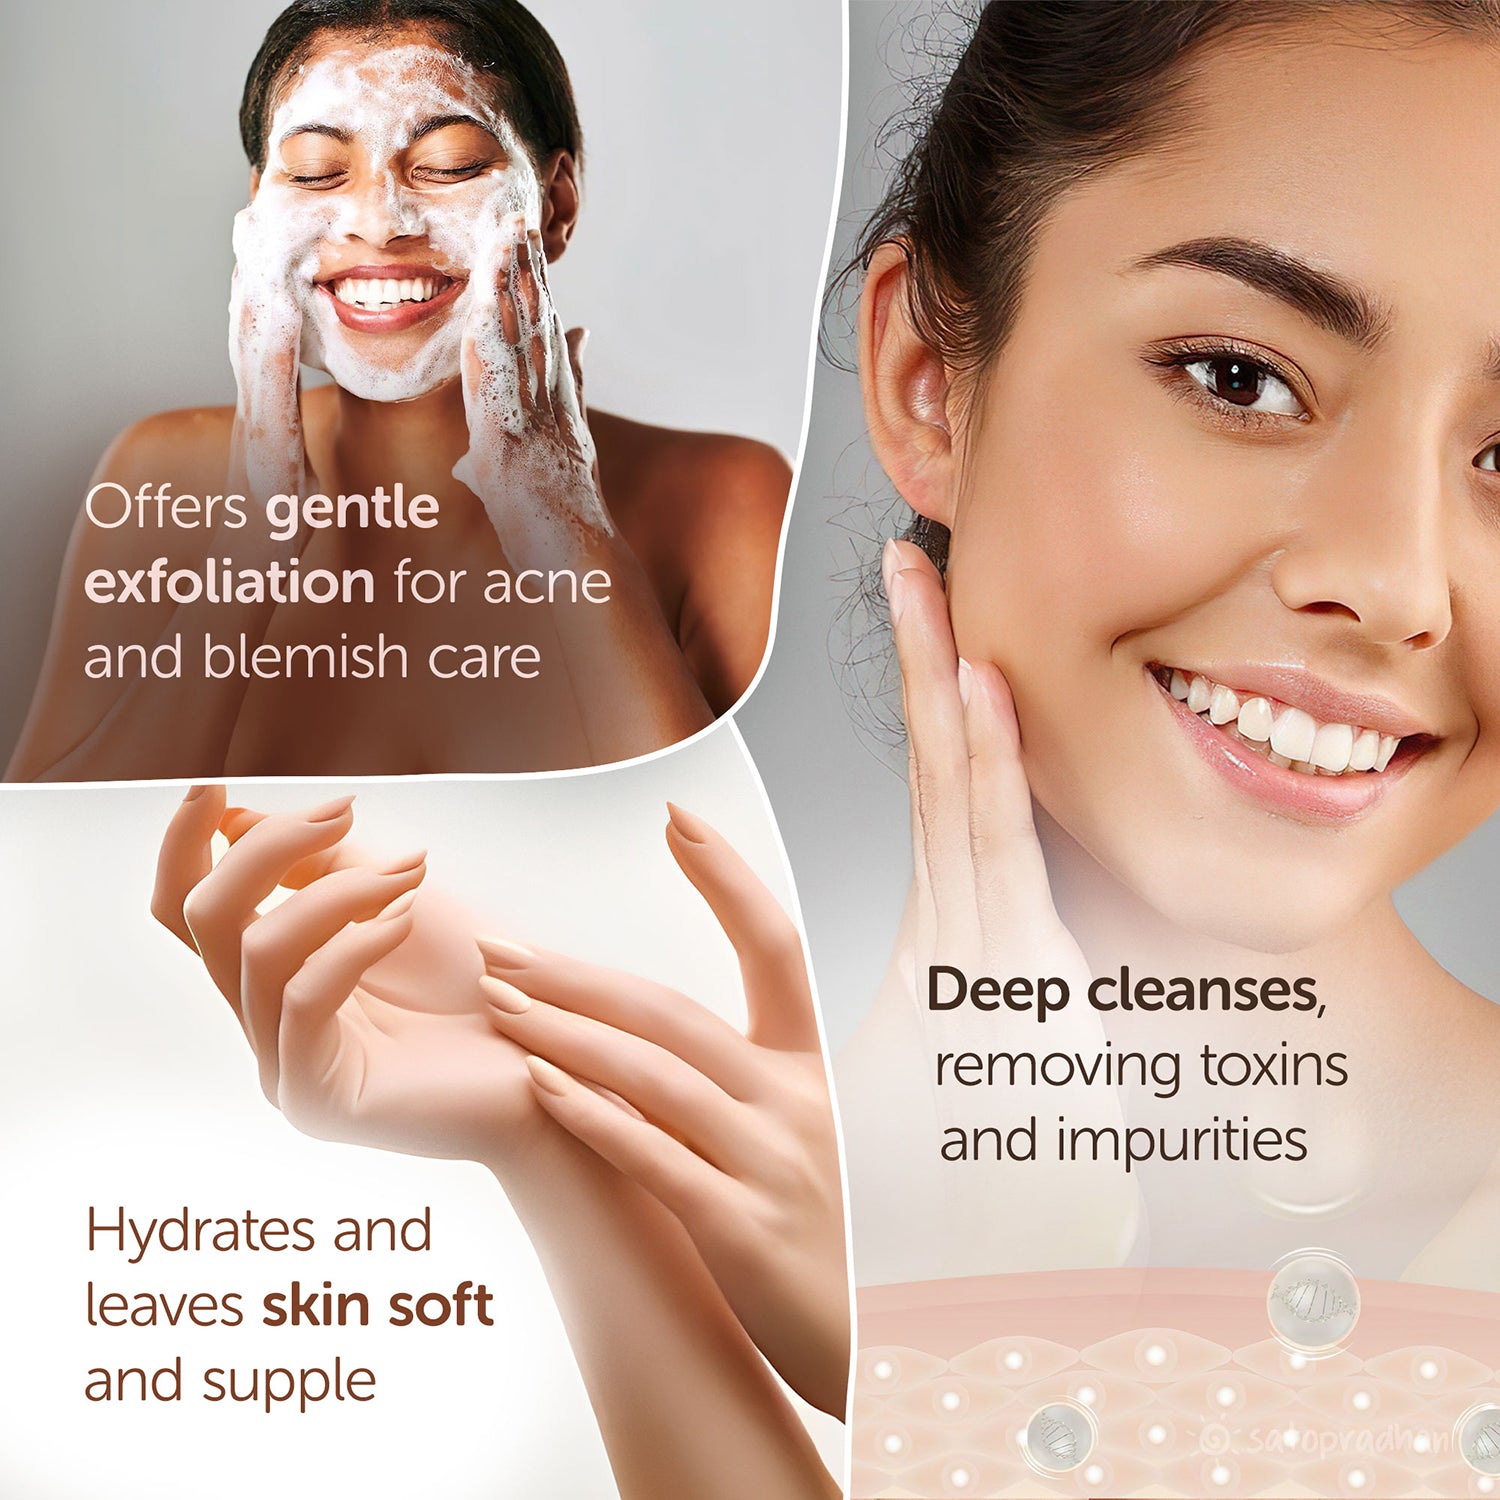 Promots deep cleansing and soften skin 